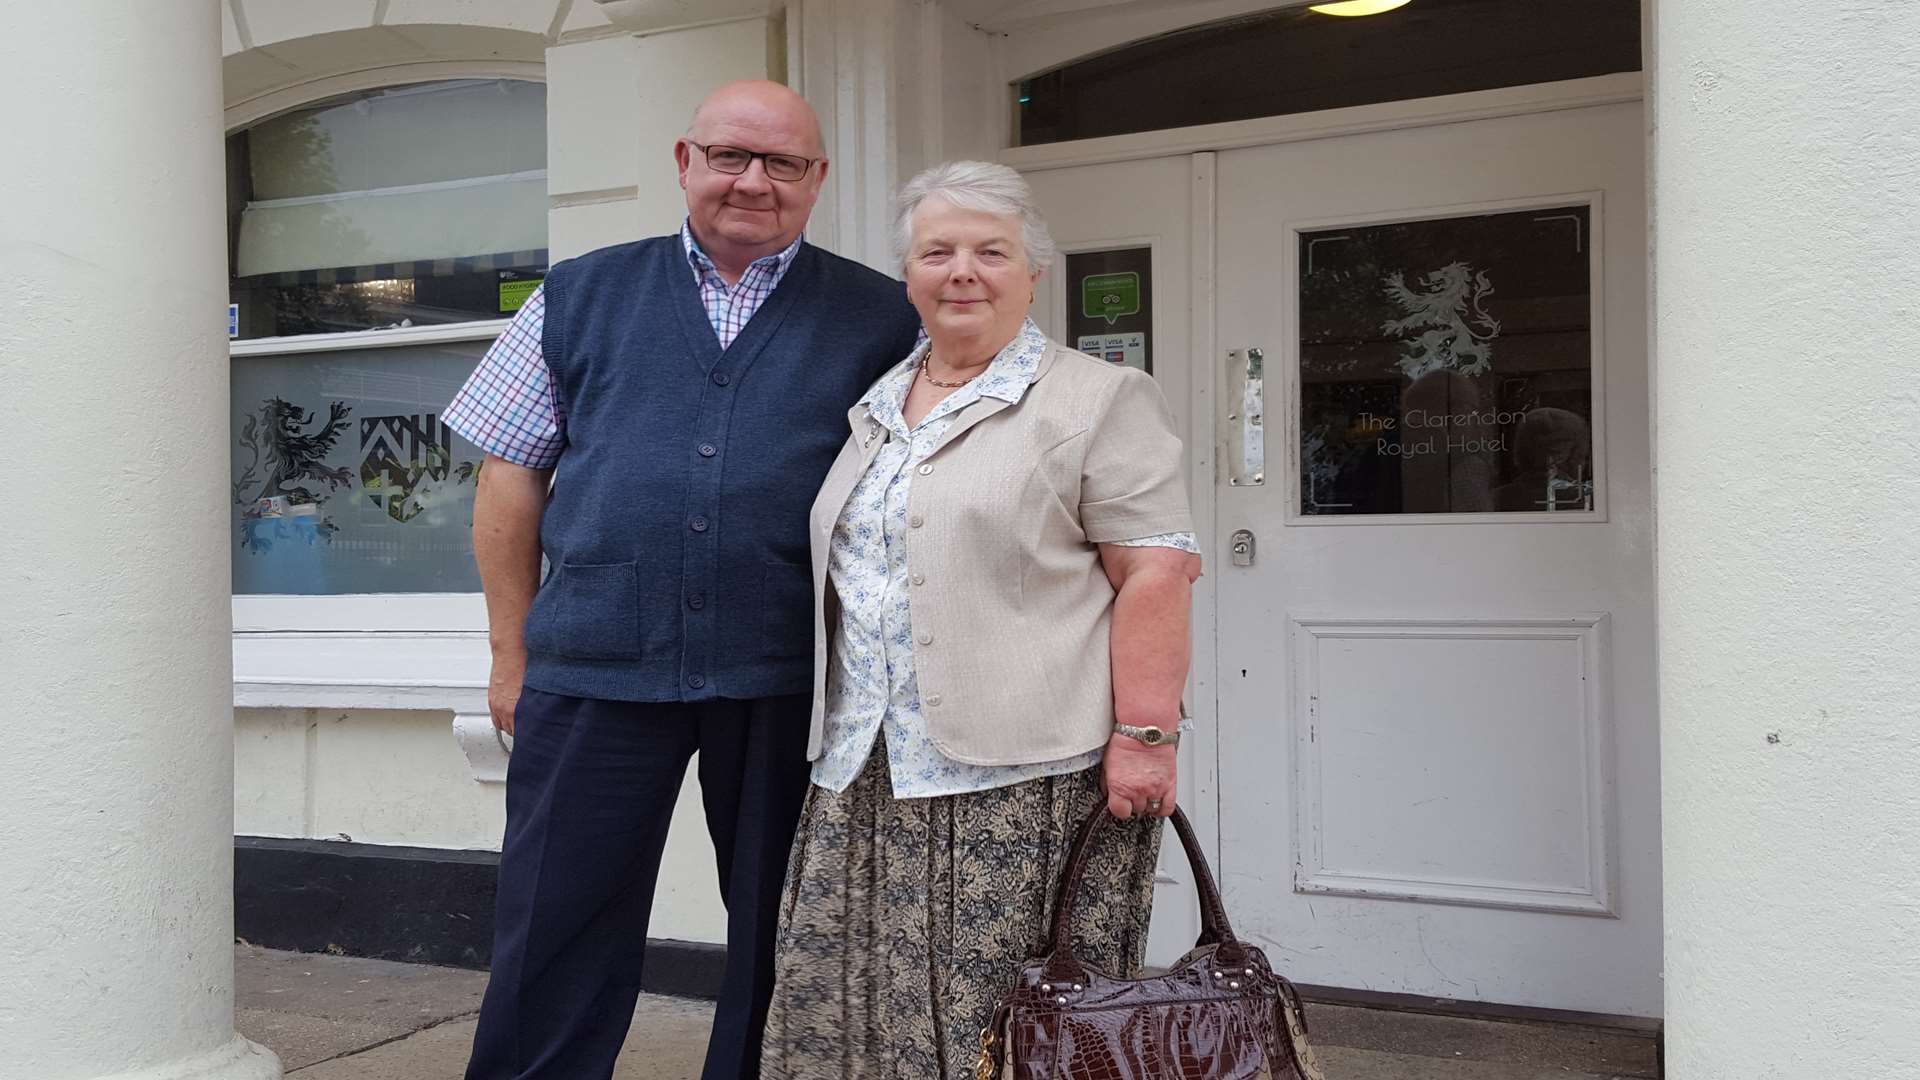 Gravesham Borough Market Hall is preparing to reopen. Former stall holders Derek and Gloria Shaw were given a behind-the-scenes tour. The Shaws were staying at the Clarendon